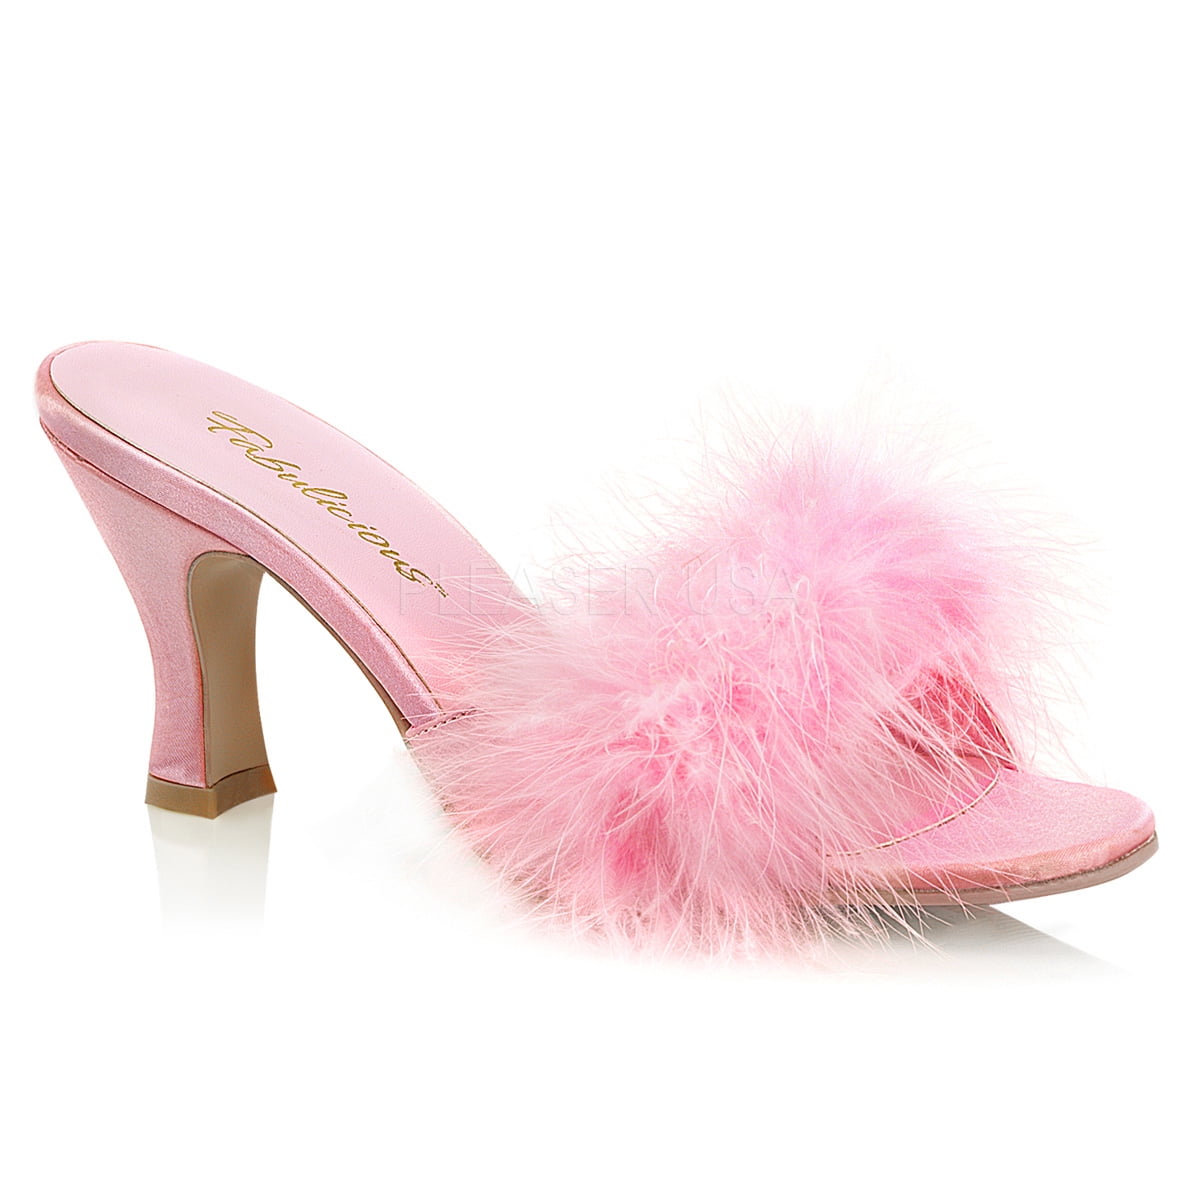 Mod The Sims - WCIF feather slippers/marabou slippers